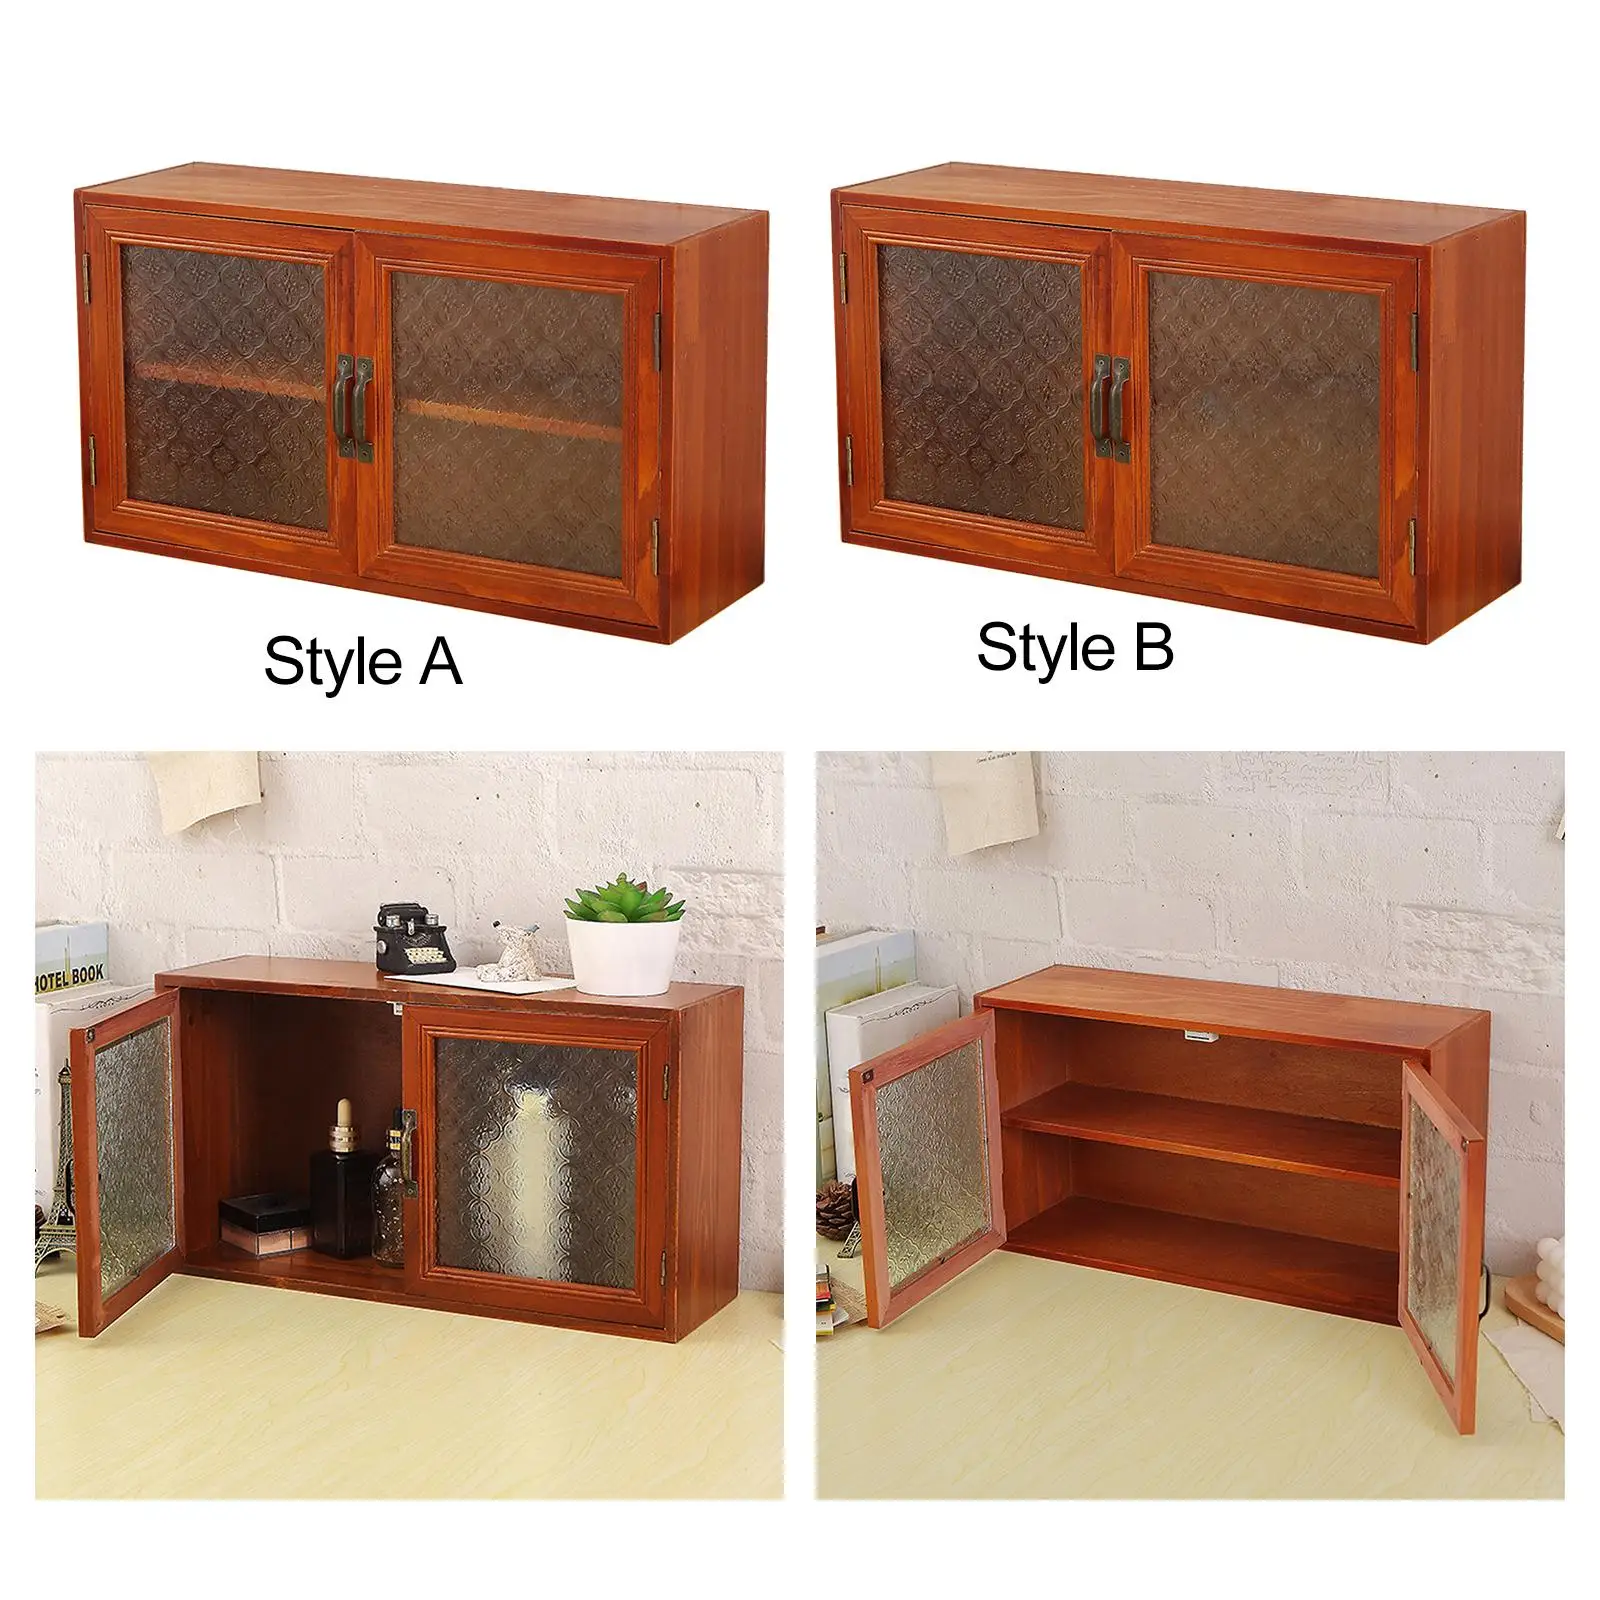 Wood Storage Cabinet Home Store Use Dual Tiers Desktop Display Rack Shelf for Kitchen Cabinets Pantry Sugar Packets Diecast Toys